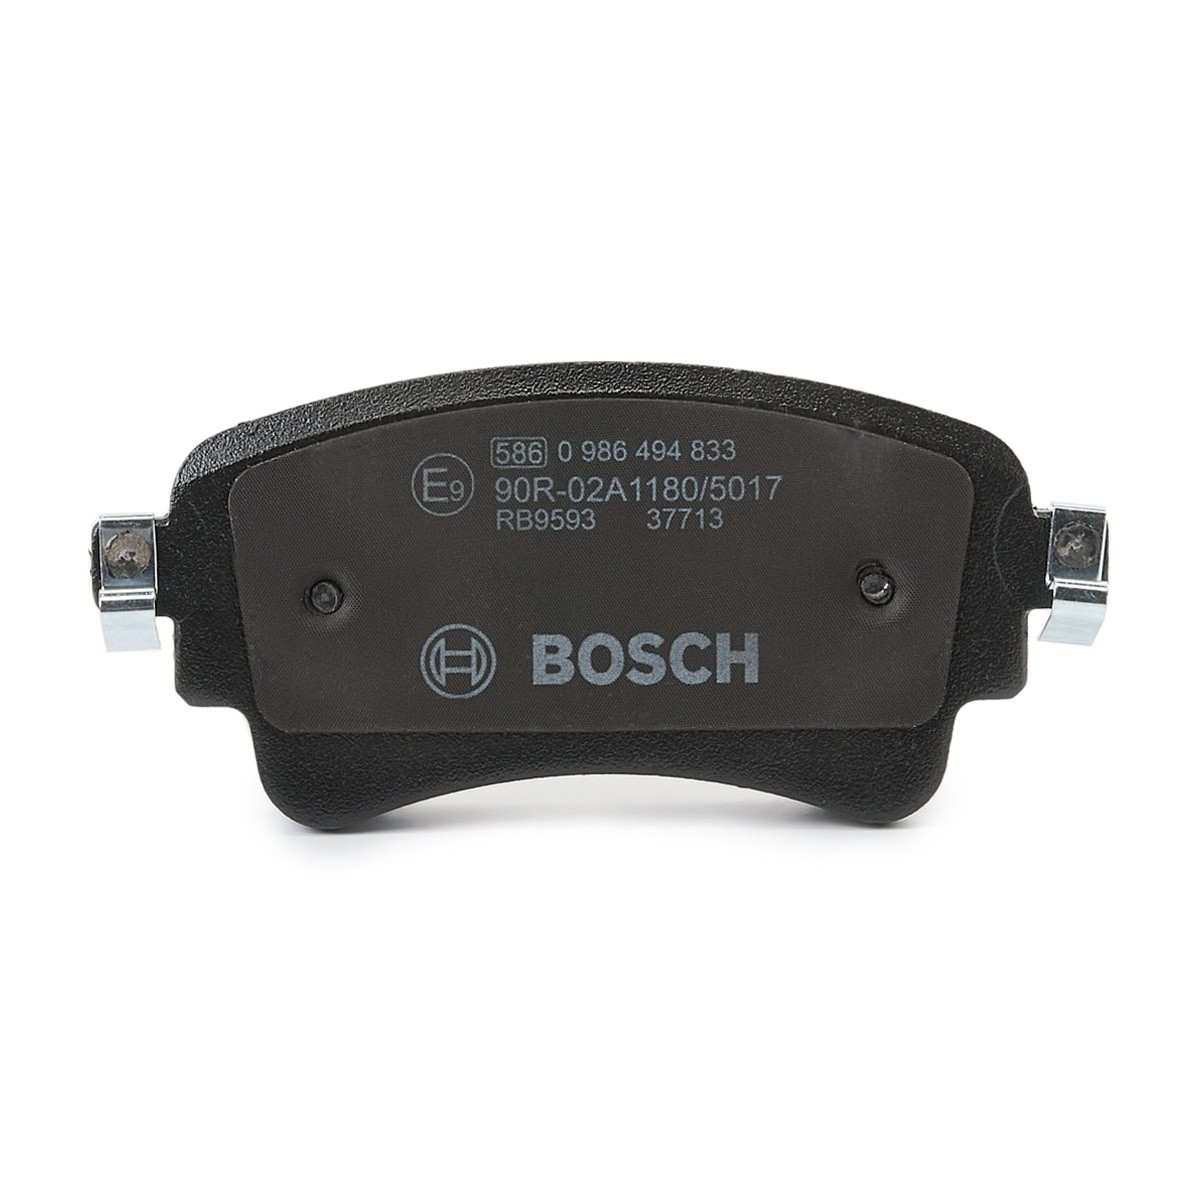 0986494833 Disc brake pads BOSCH E9 90R- 02A0904/4422 review and test